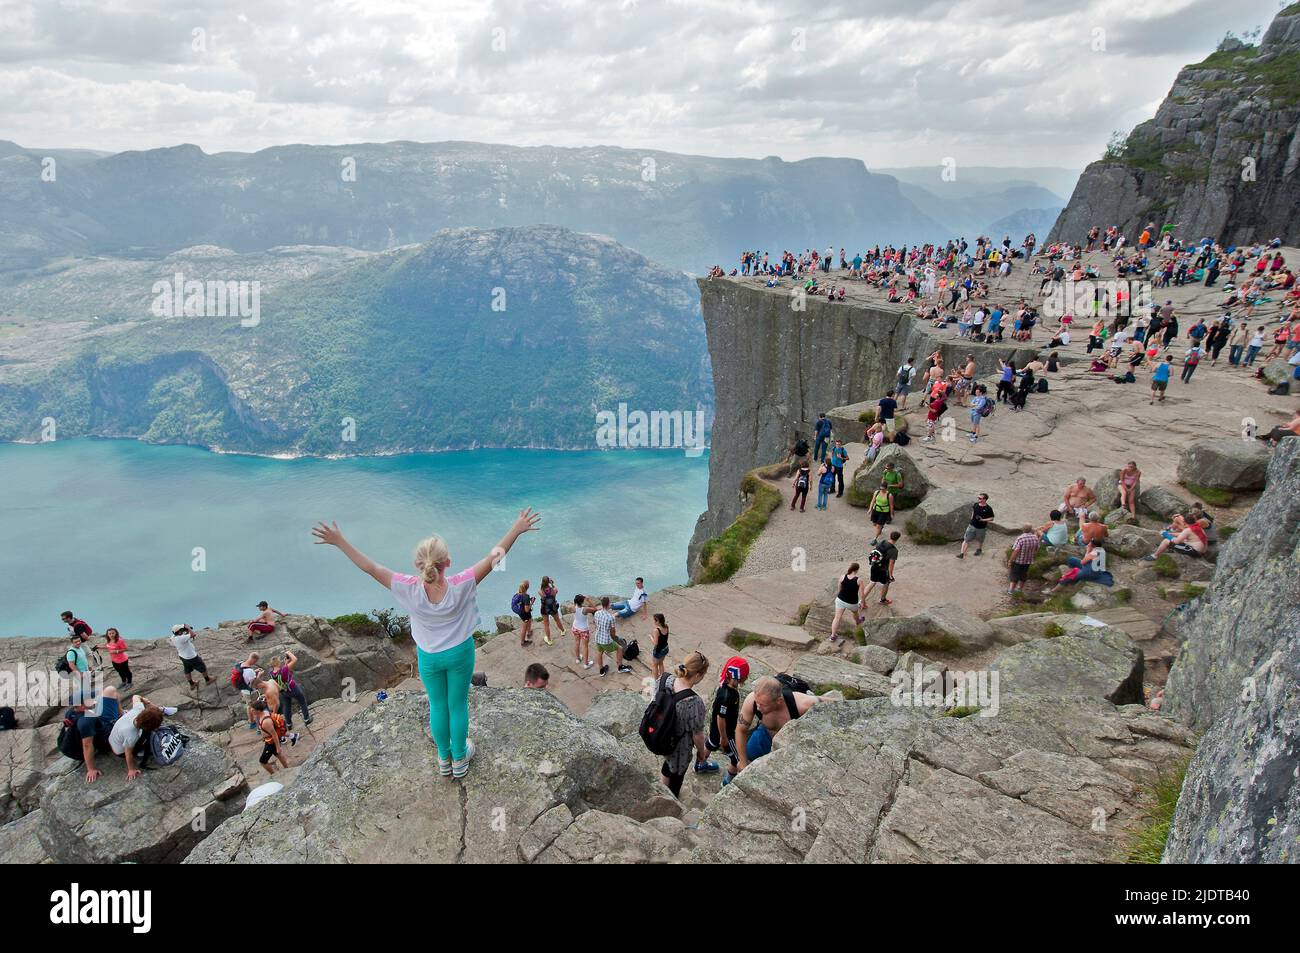 Visitors to the 604 meters high, vertical cliff known as Pulpit Rock (Preikestolen) in Lysefjorden, Forsand county, Rogaland Norway. Stock Photo